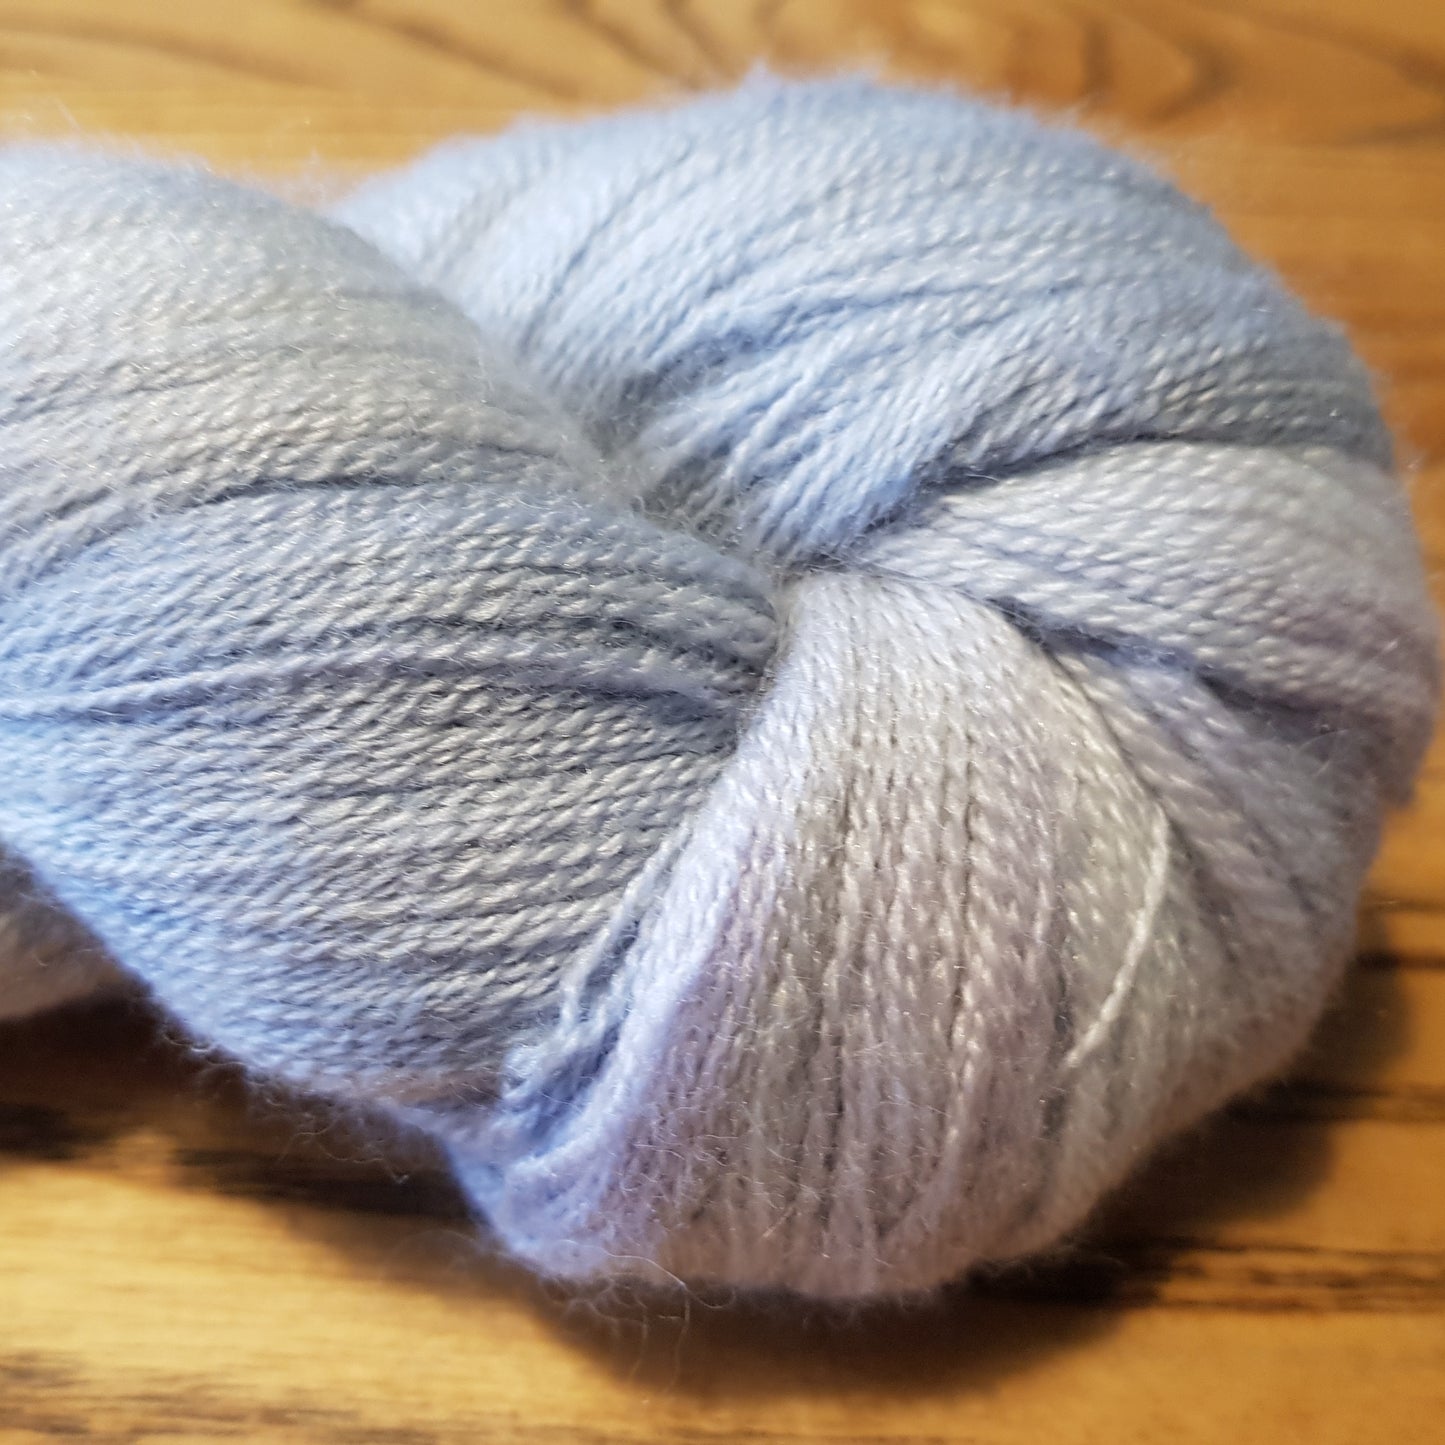 100G Extra fine merino and silk hand dyed luxury Lace Weight Yarn - "Anonymouse" - **SALE** END OF STOCK